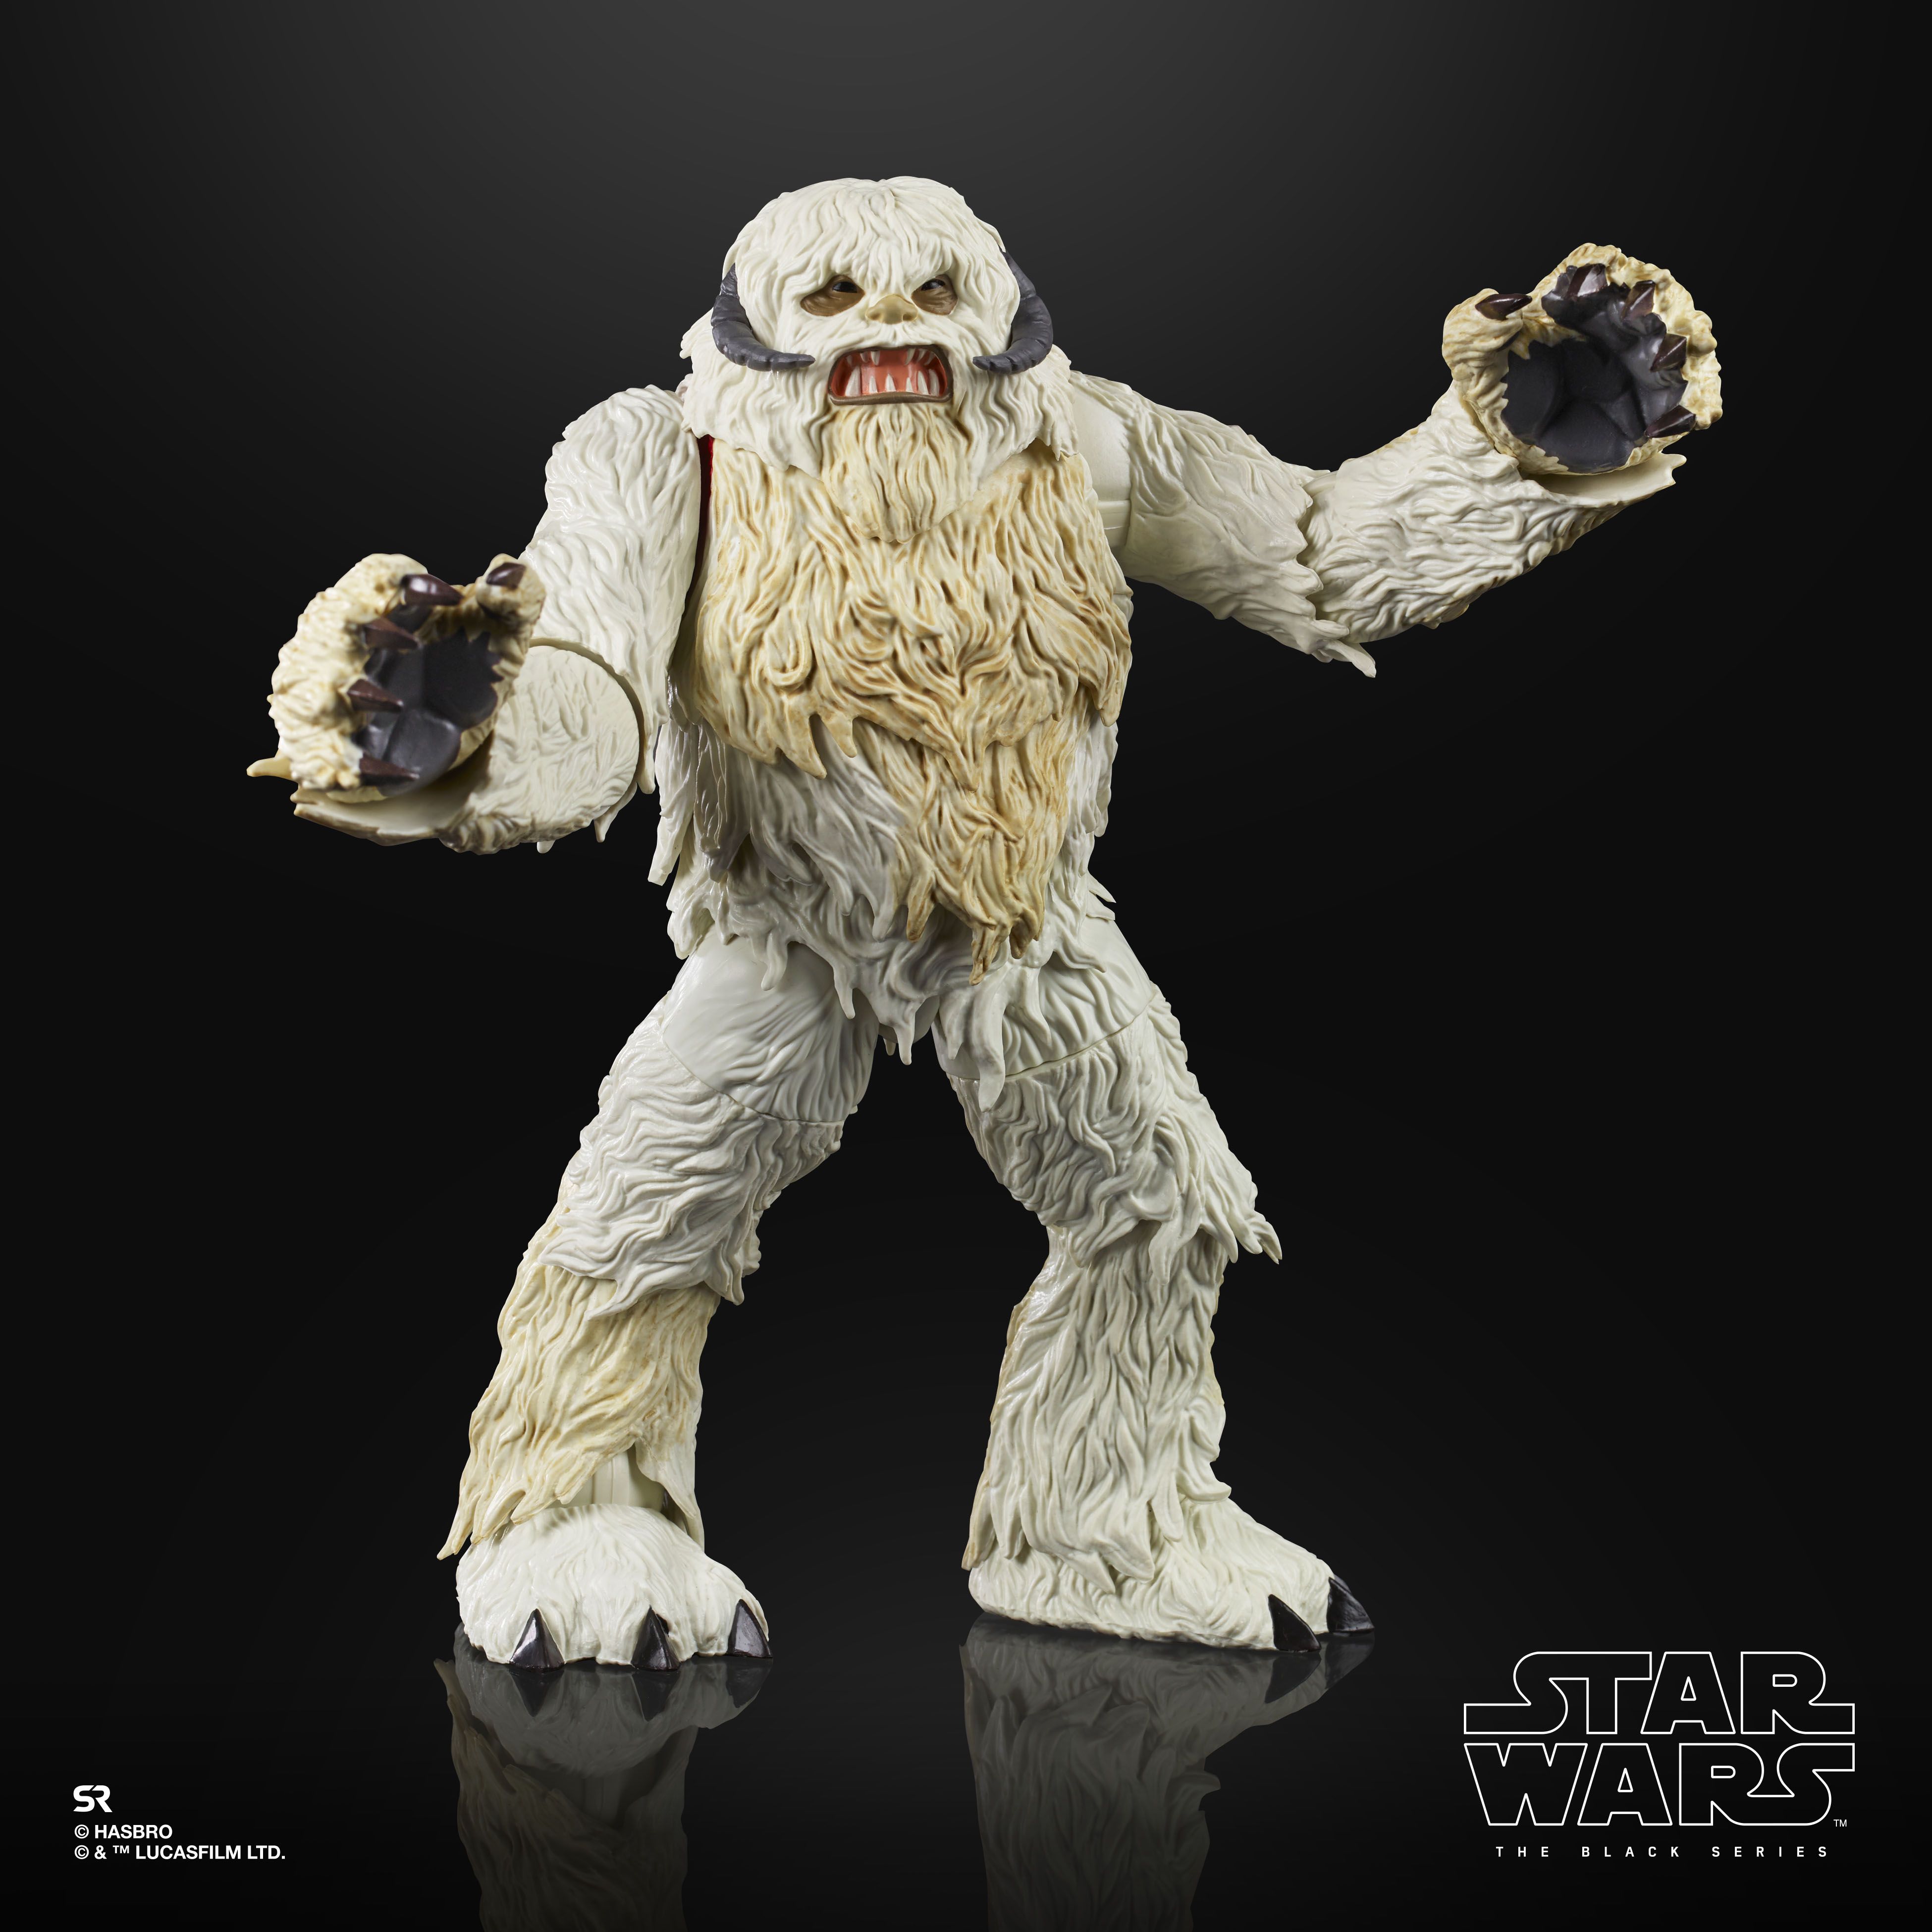 Star Wars The Black Series 6-Inch-Scale Hoth Wampa Figure - oop (Out of Packaging)